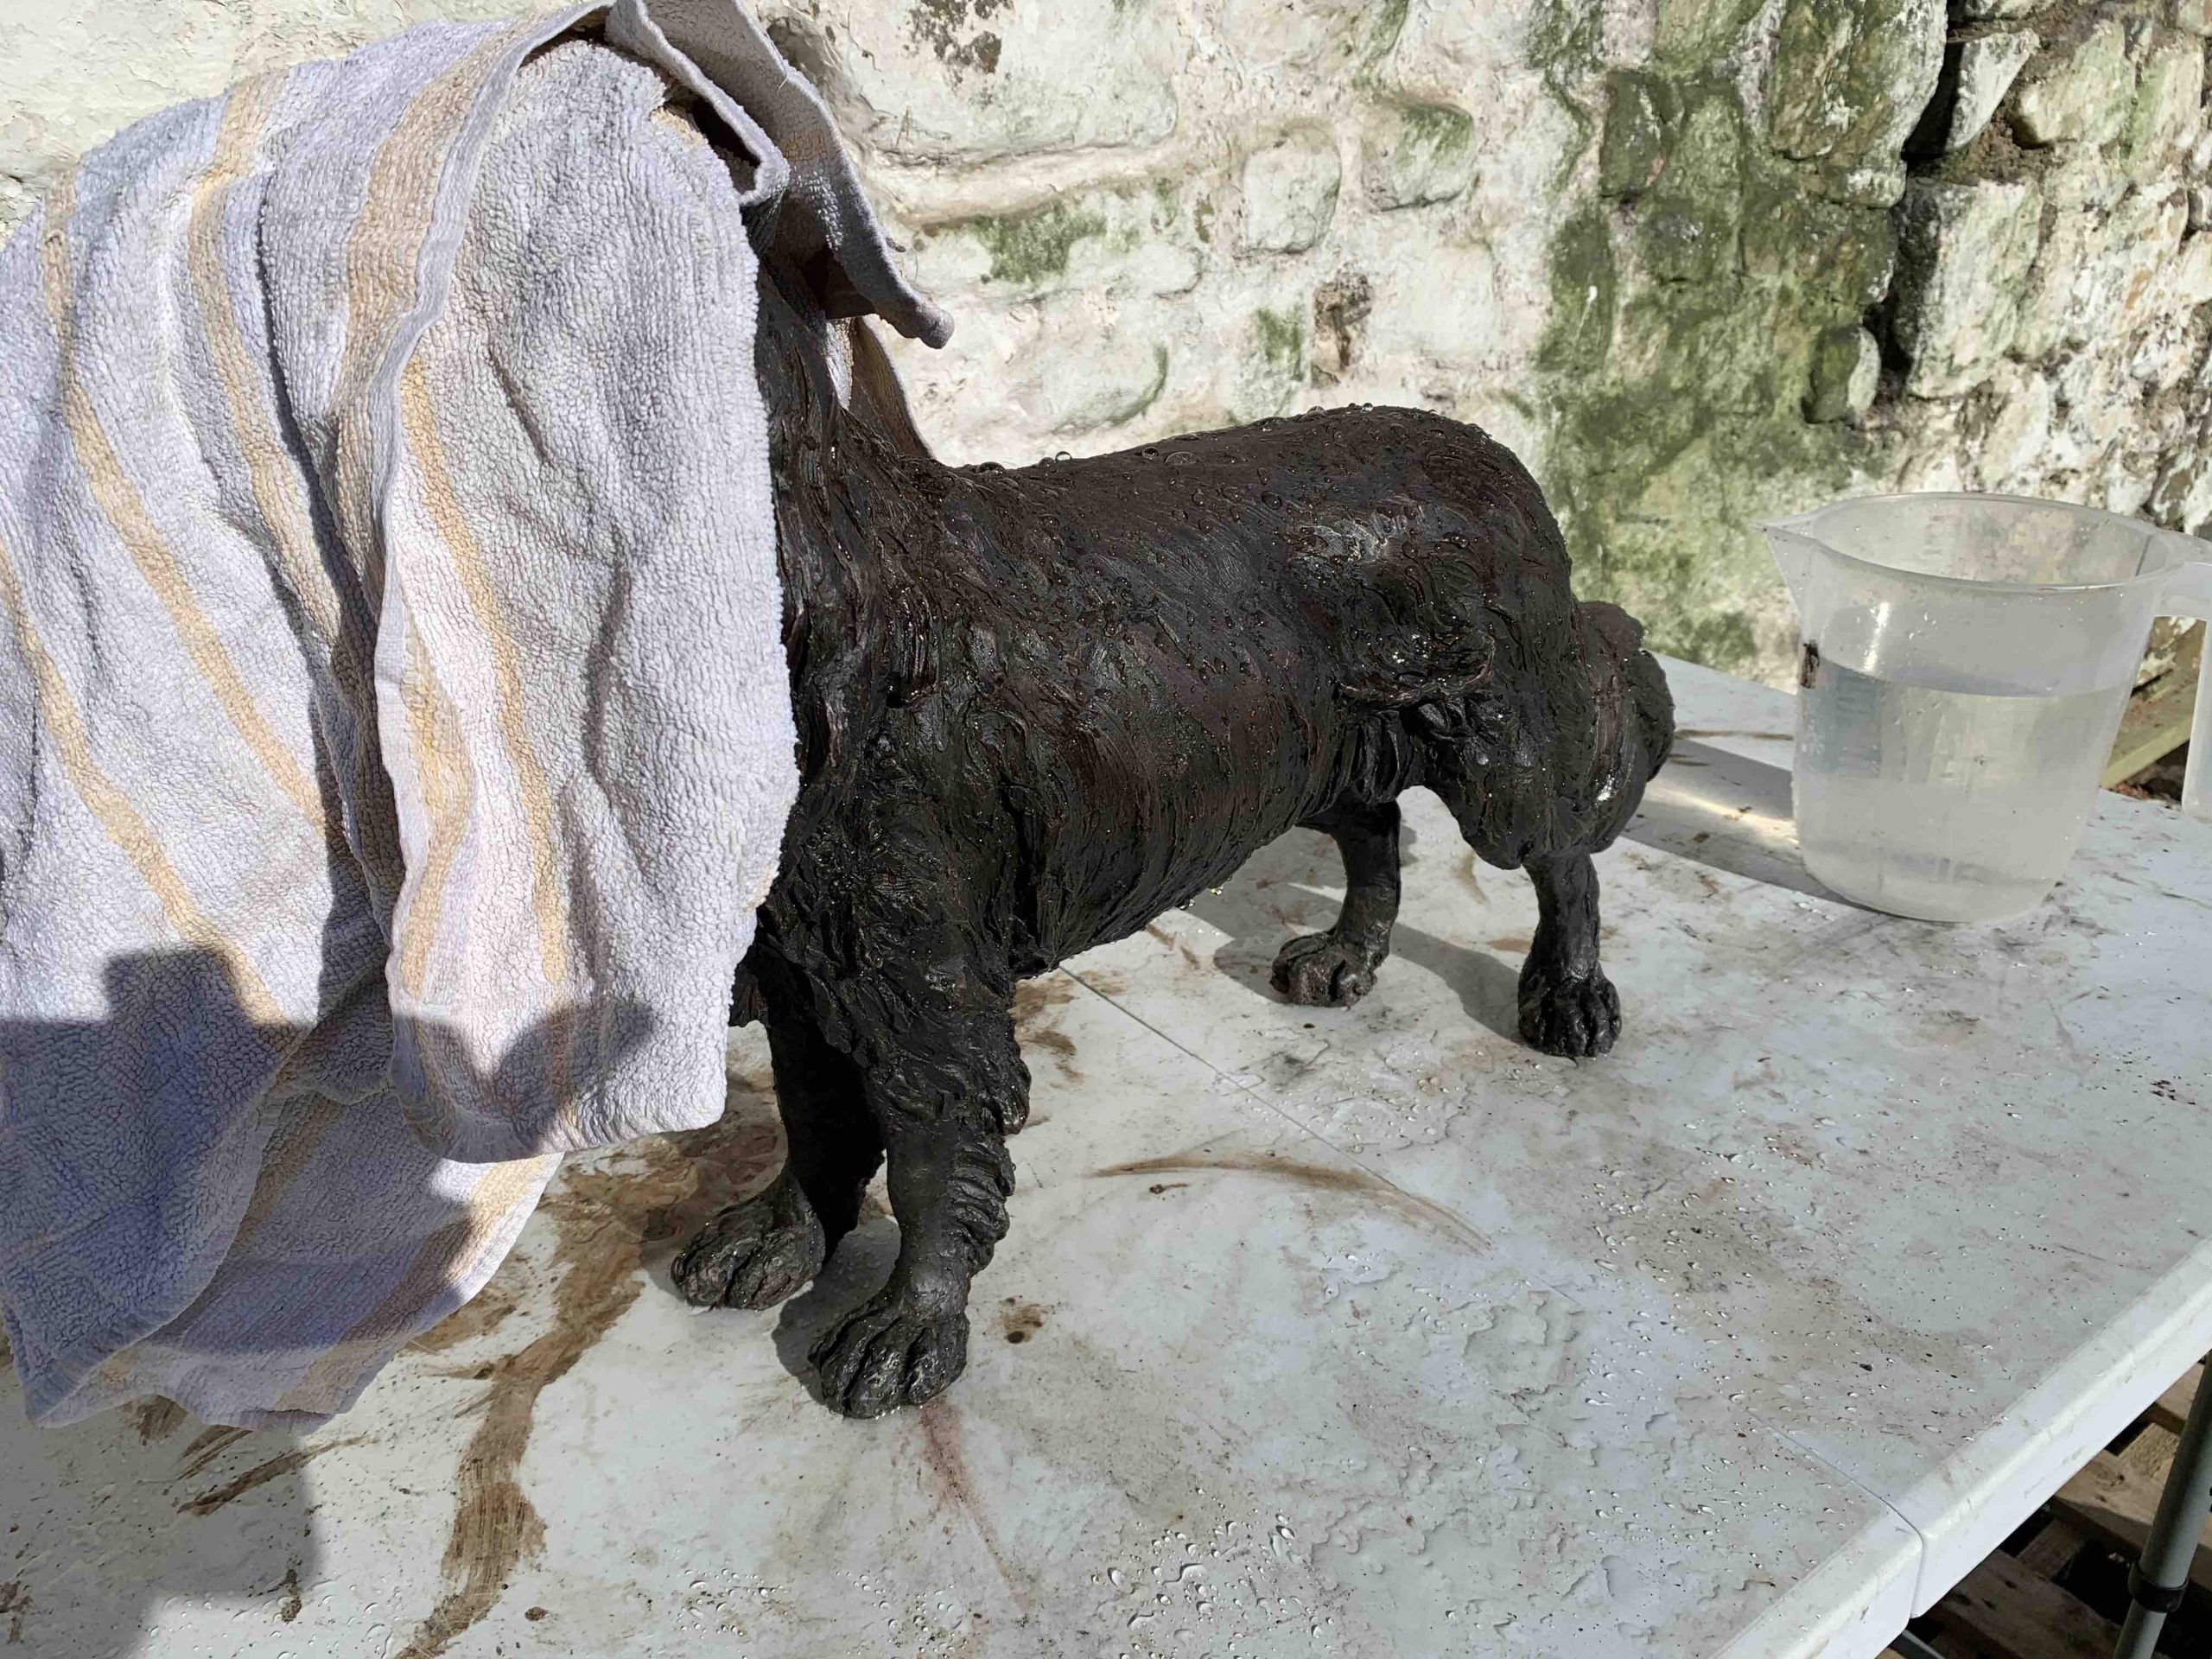 cleaning a bronze sculpture with a towel